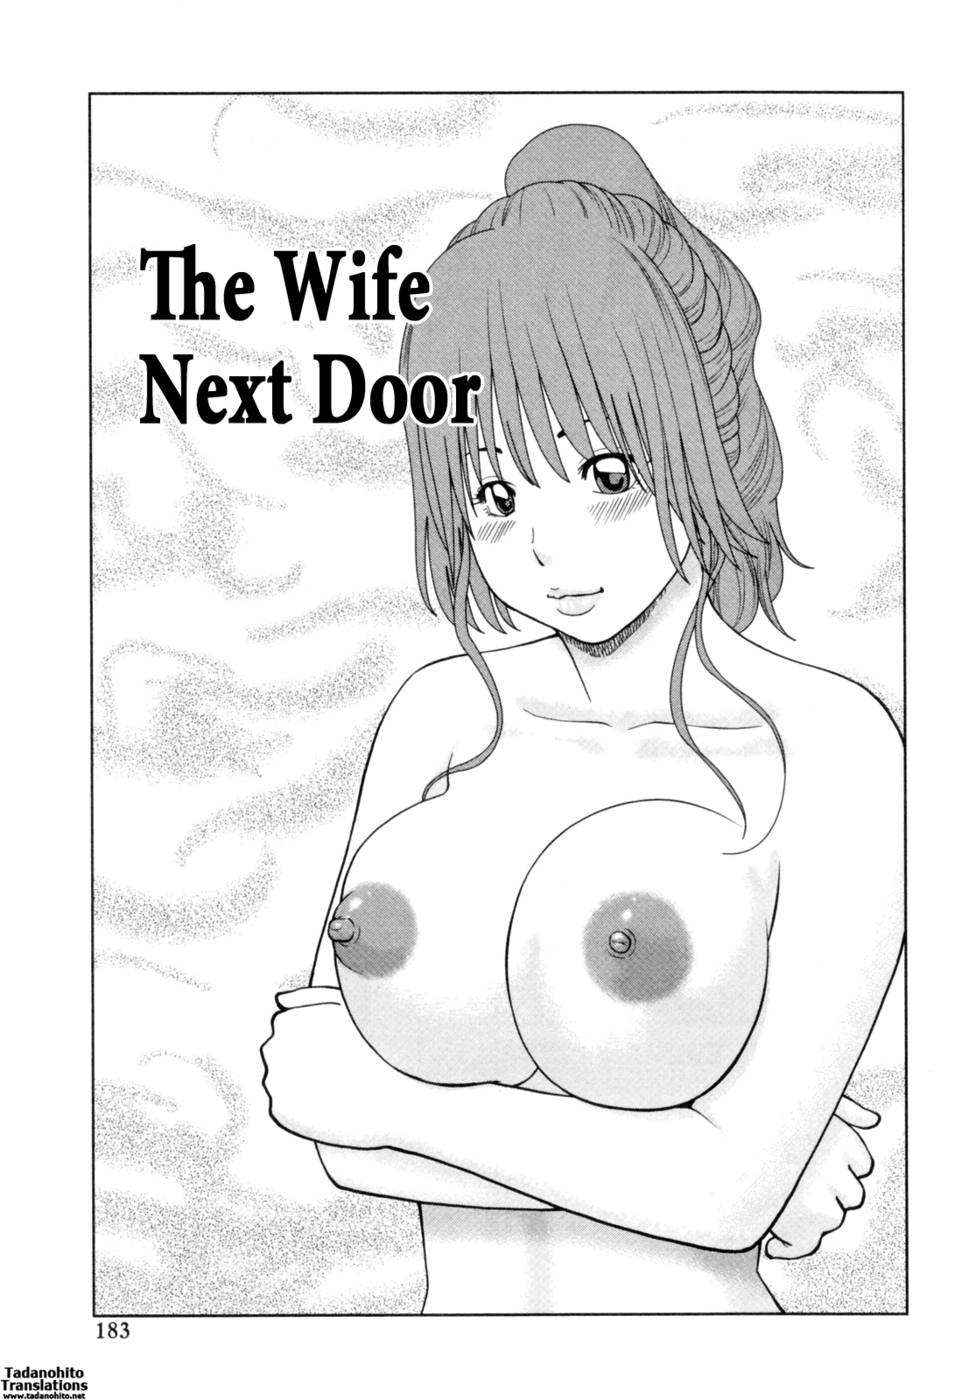 Xxx Jepang Sub Indo - Chapter 10-The Wife Next Door - 32 Year Old Unsatisfied Wife ...